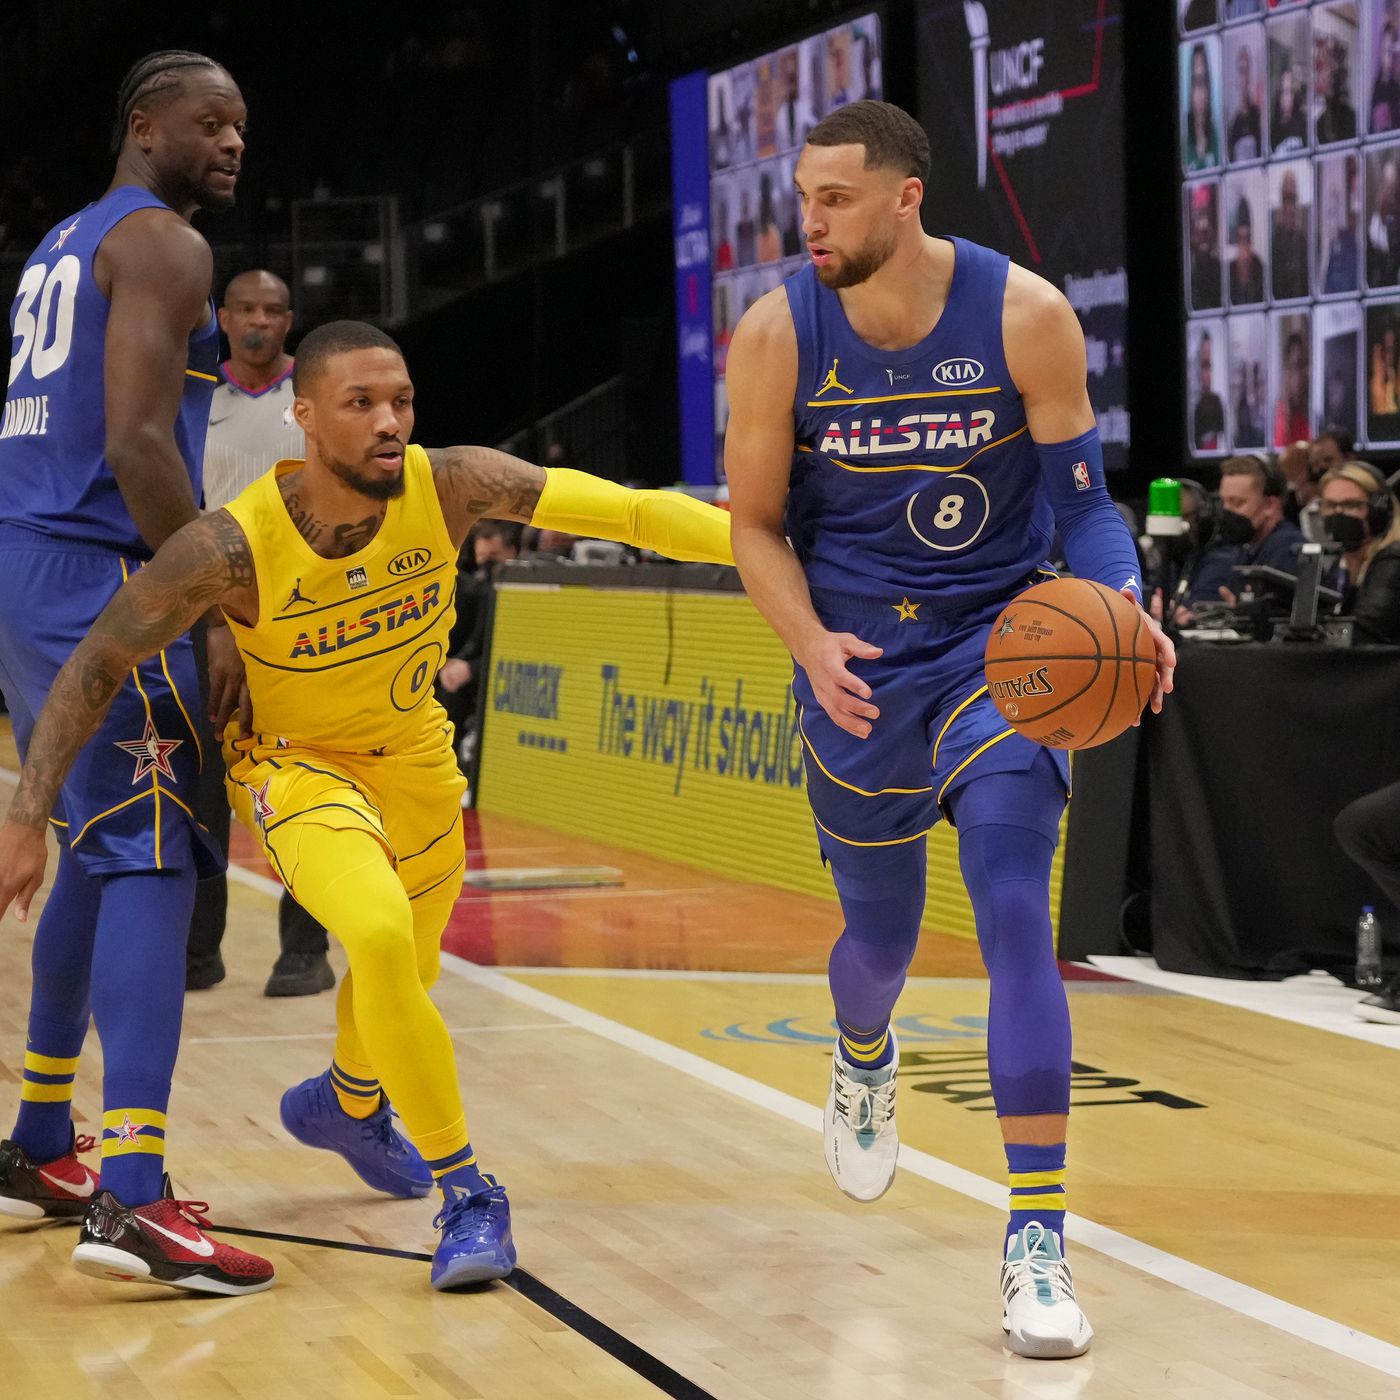 Nba All Star Weekend Schedule 2022 Nba All-Star Game 2022: Schedule, Date, Location, Rosters, Starters, More -  Draftkings Nation